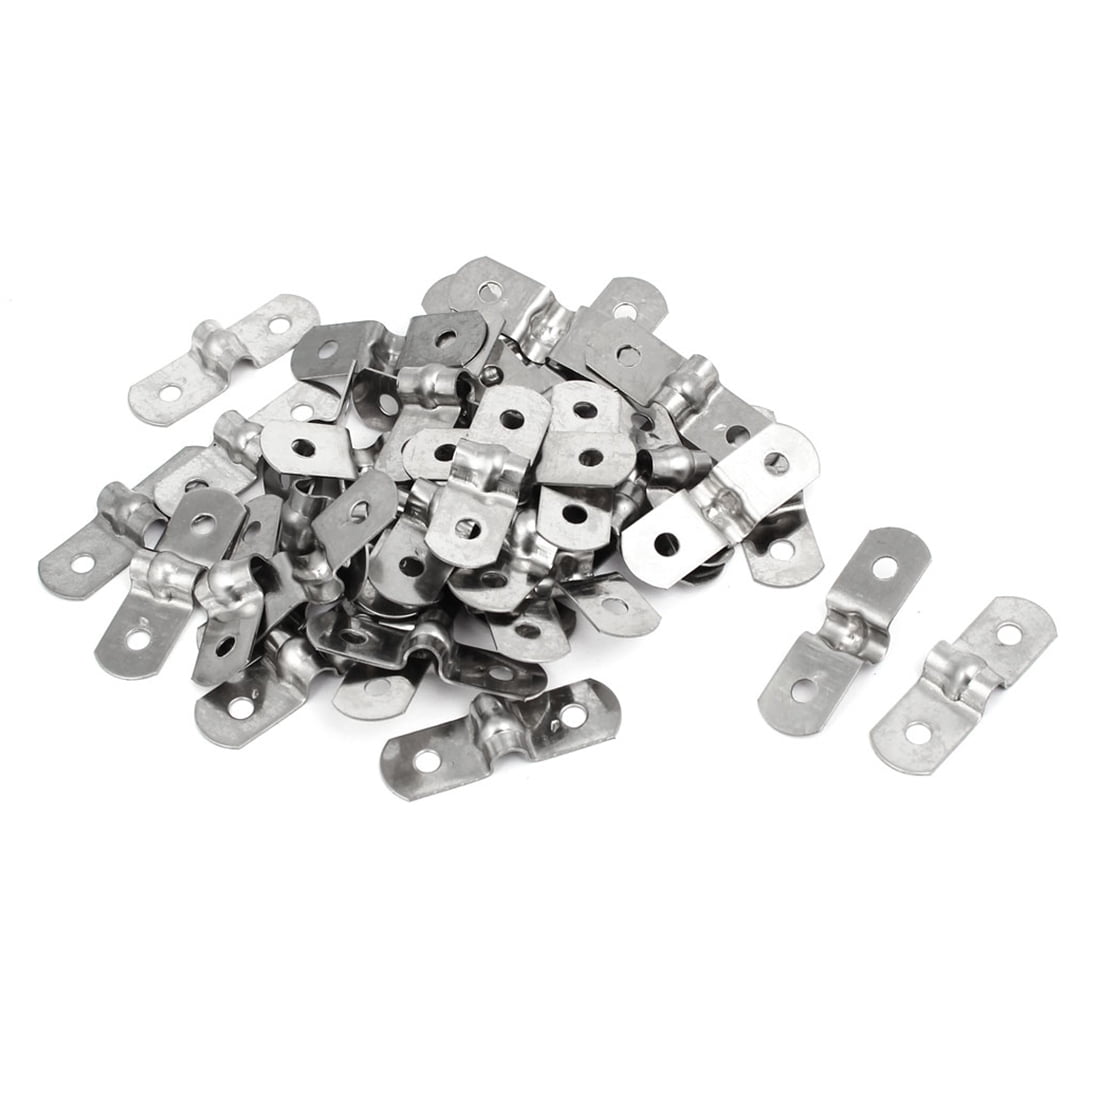 Uptell M80 201 Stainless Steel Two Hole Pipe Straps Tension Tube Clip Clamp 10PCS